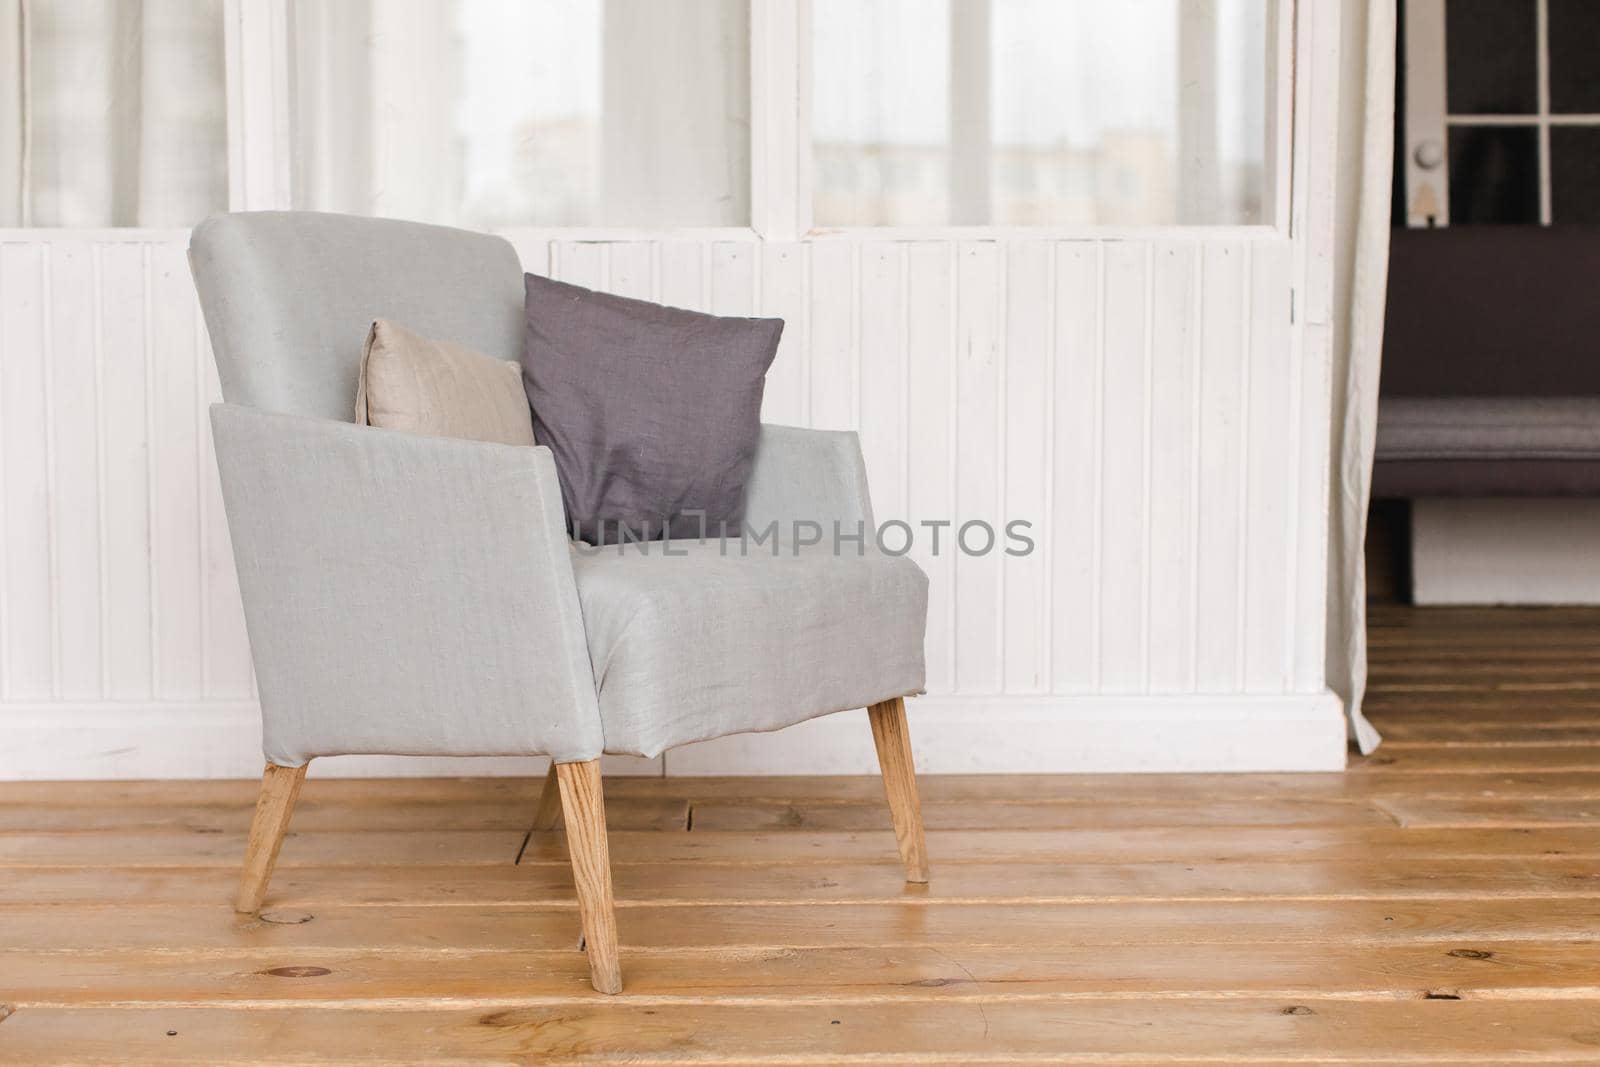 Interior shot of simple comfortable armchair with cushions on wooden floor